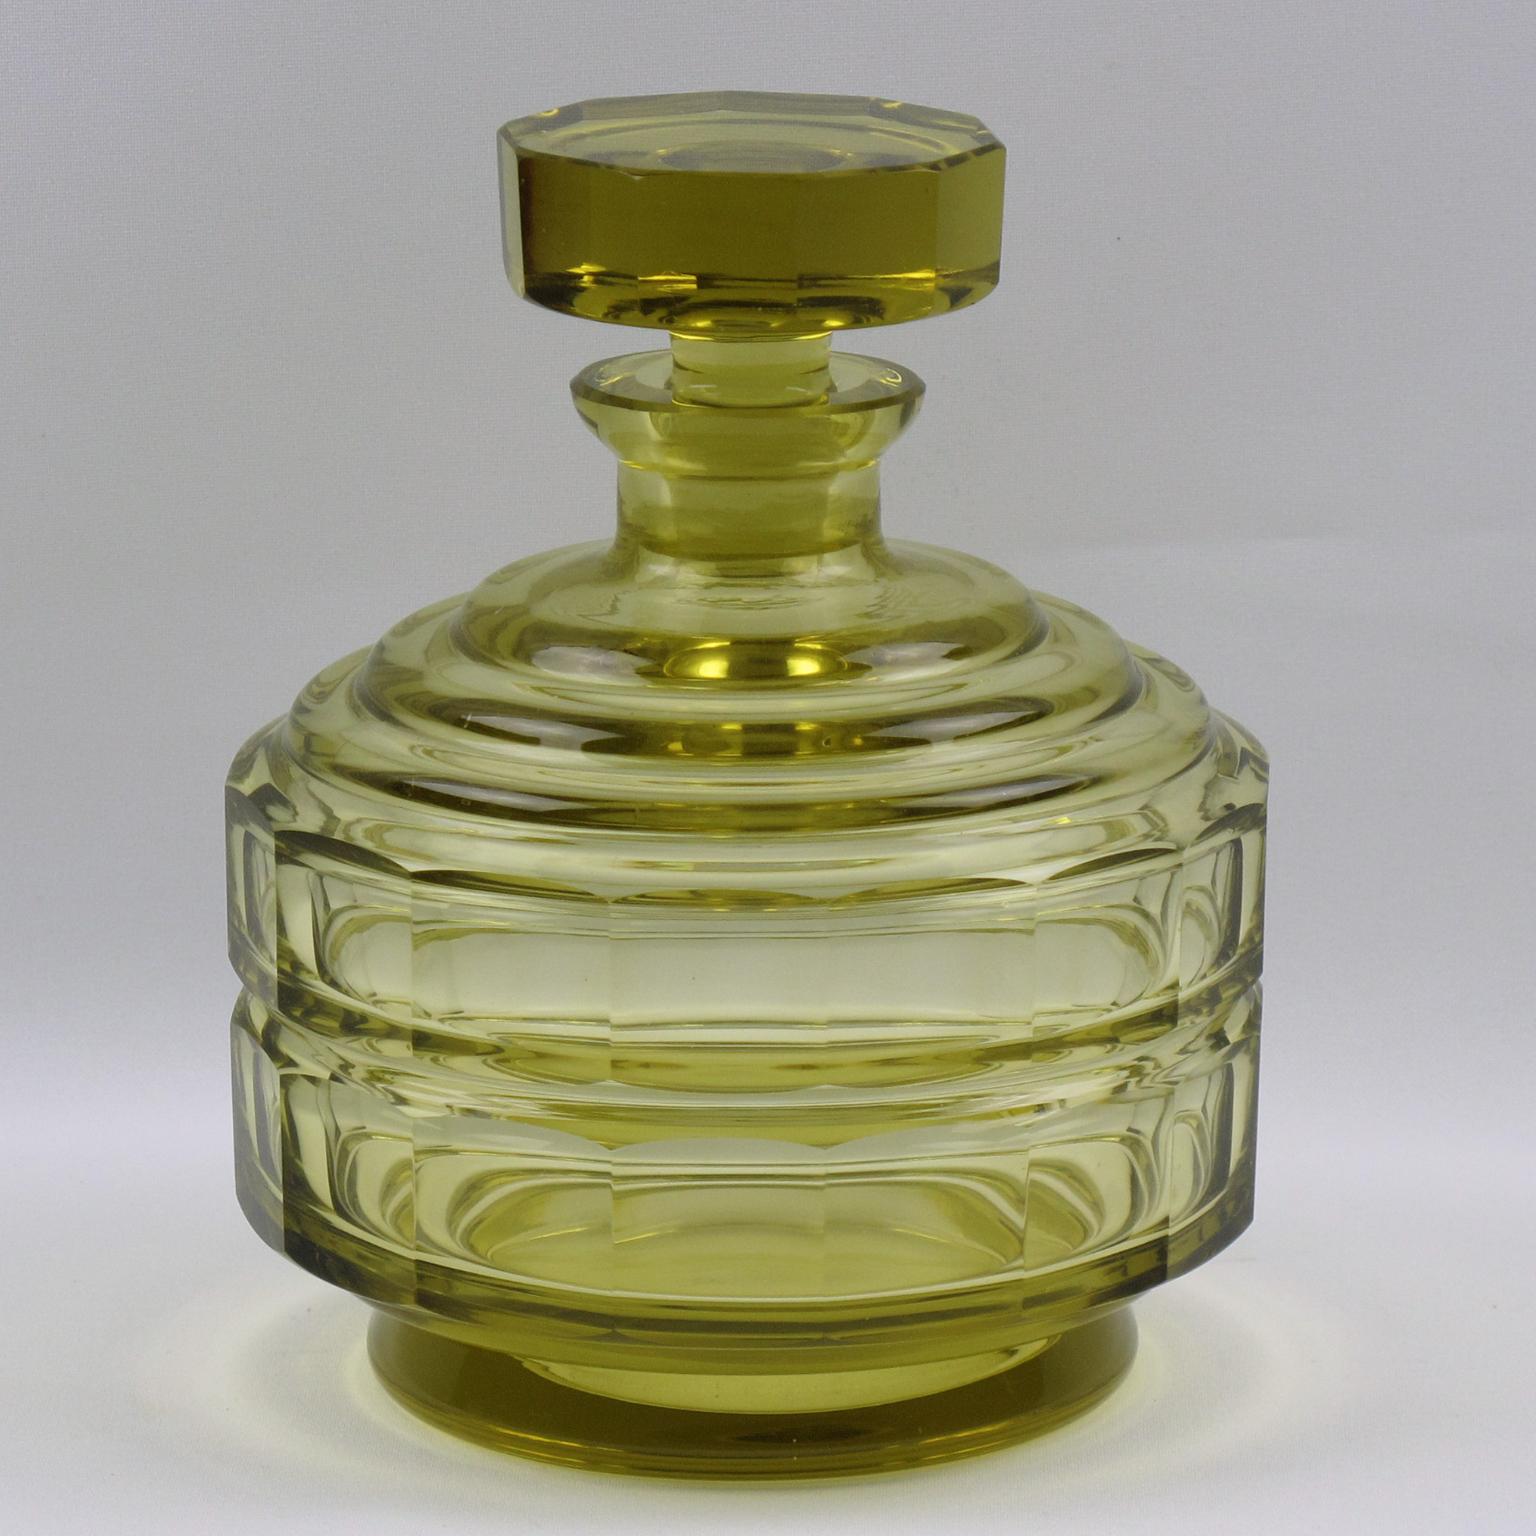 Lovely Art Deco crystal liquor or alcohol decanter set with seven matching cordial or aperitif glass. Very nice transparent yellow corn color. The stopper, body, and glass are all cut and faceted to a fine standard. Heavy quality crystal with a